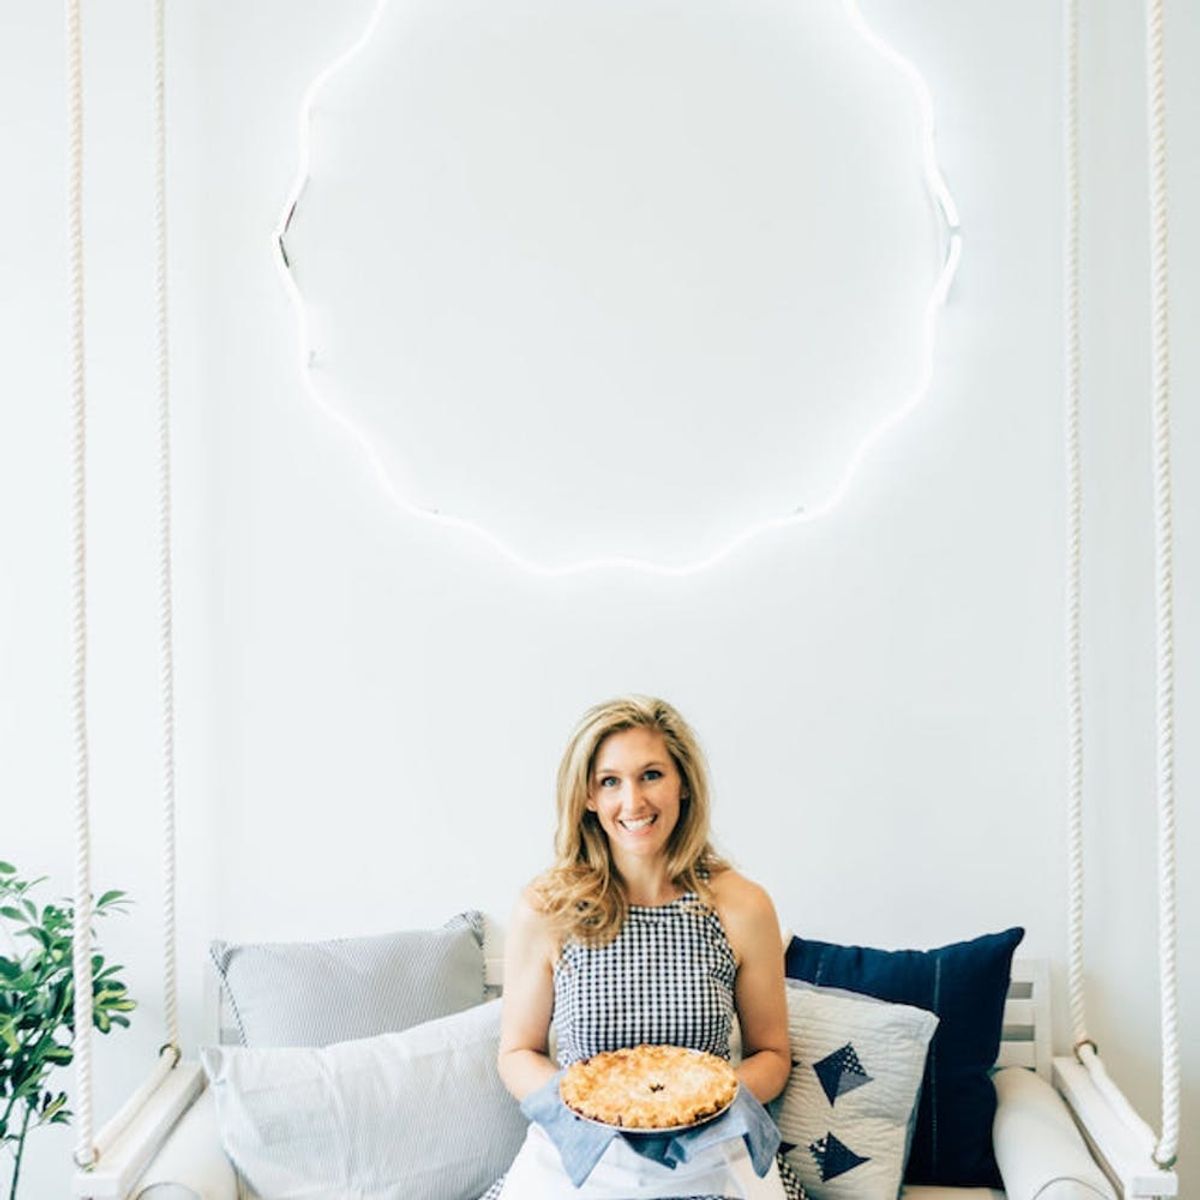 How a Former Lawyer Quit Her Job to Open a Successful Pie Shop